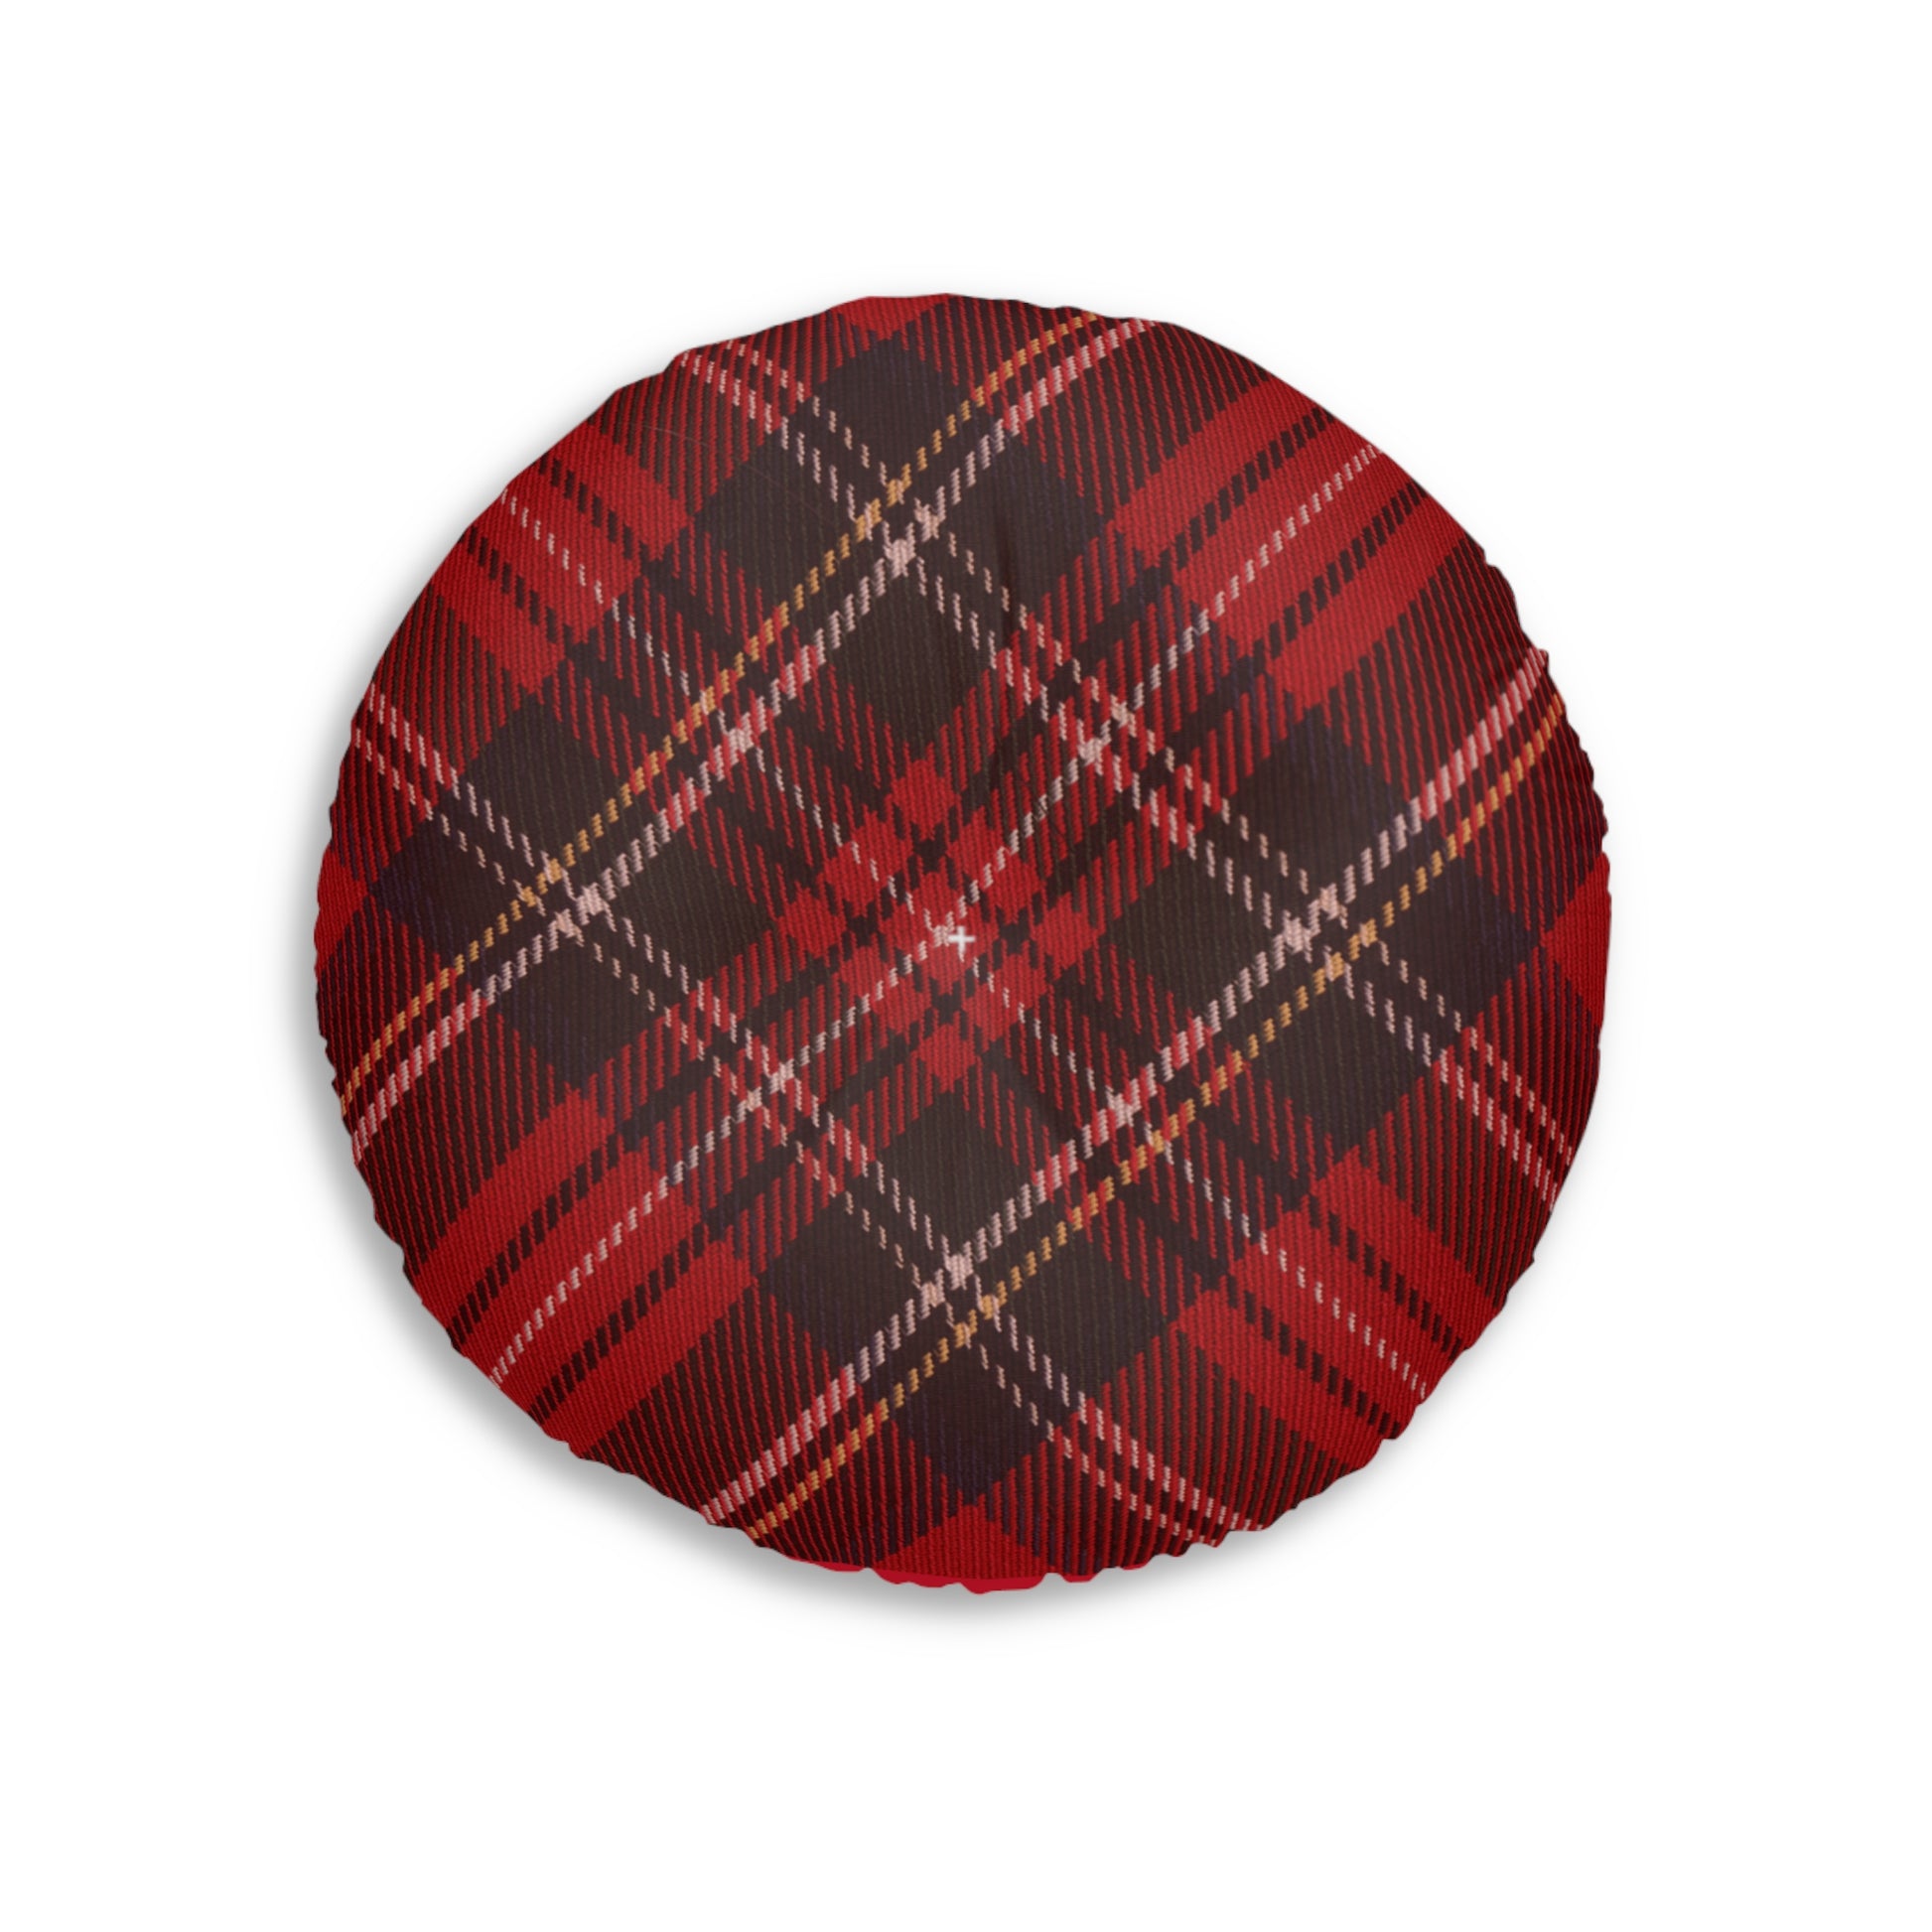 A comfortable Plaid Tufted Floor-Pillow from Printify with a red and black plaid pattern.